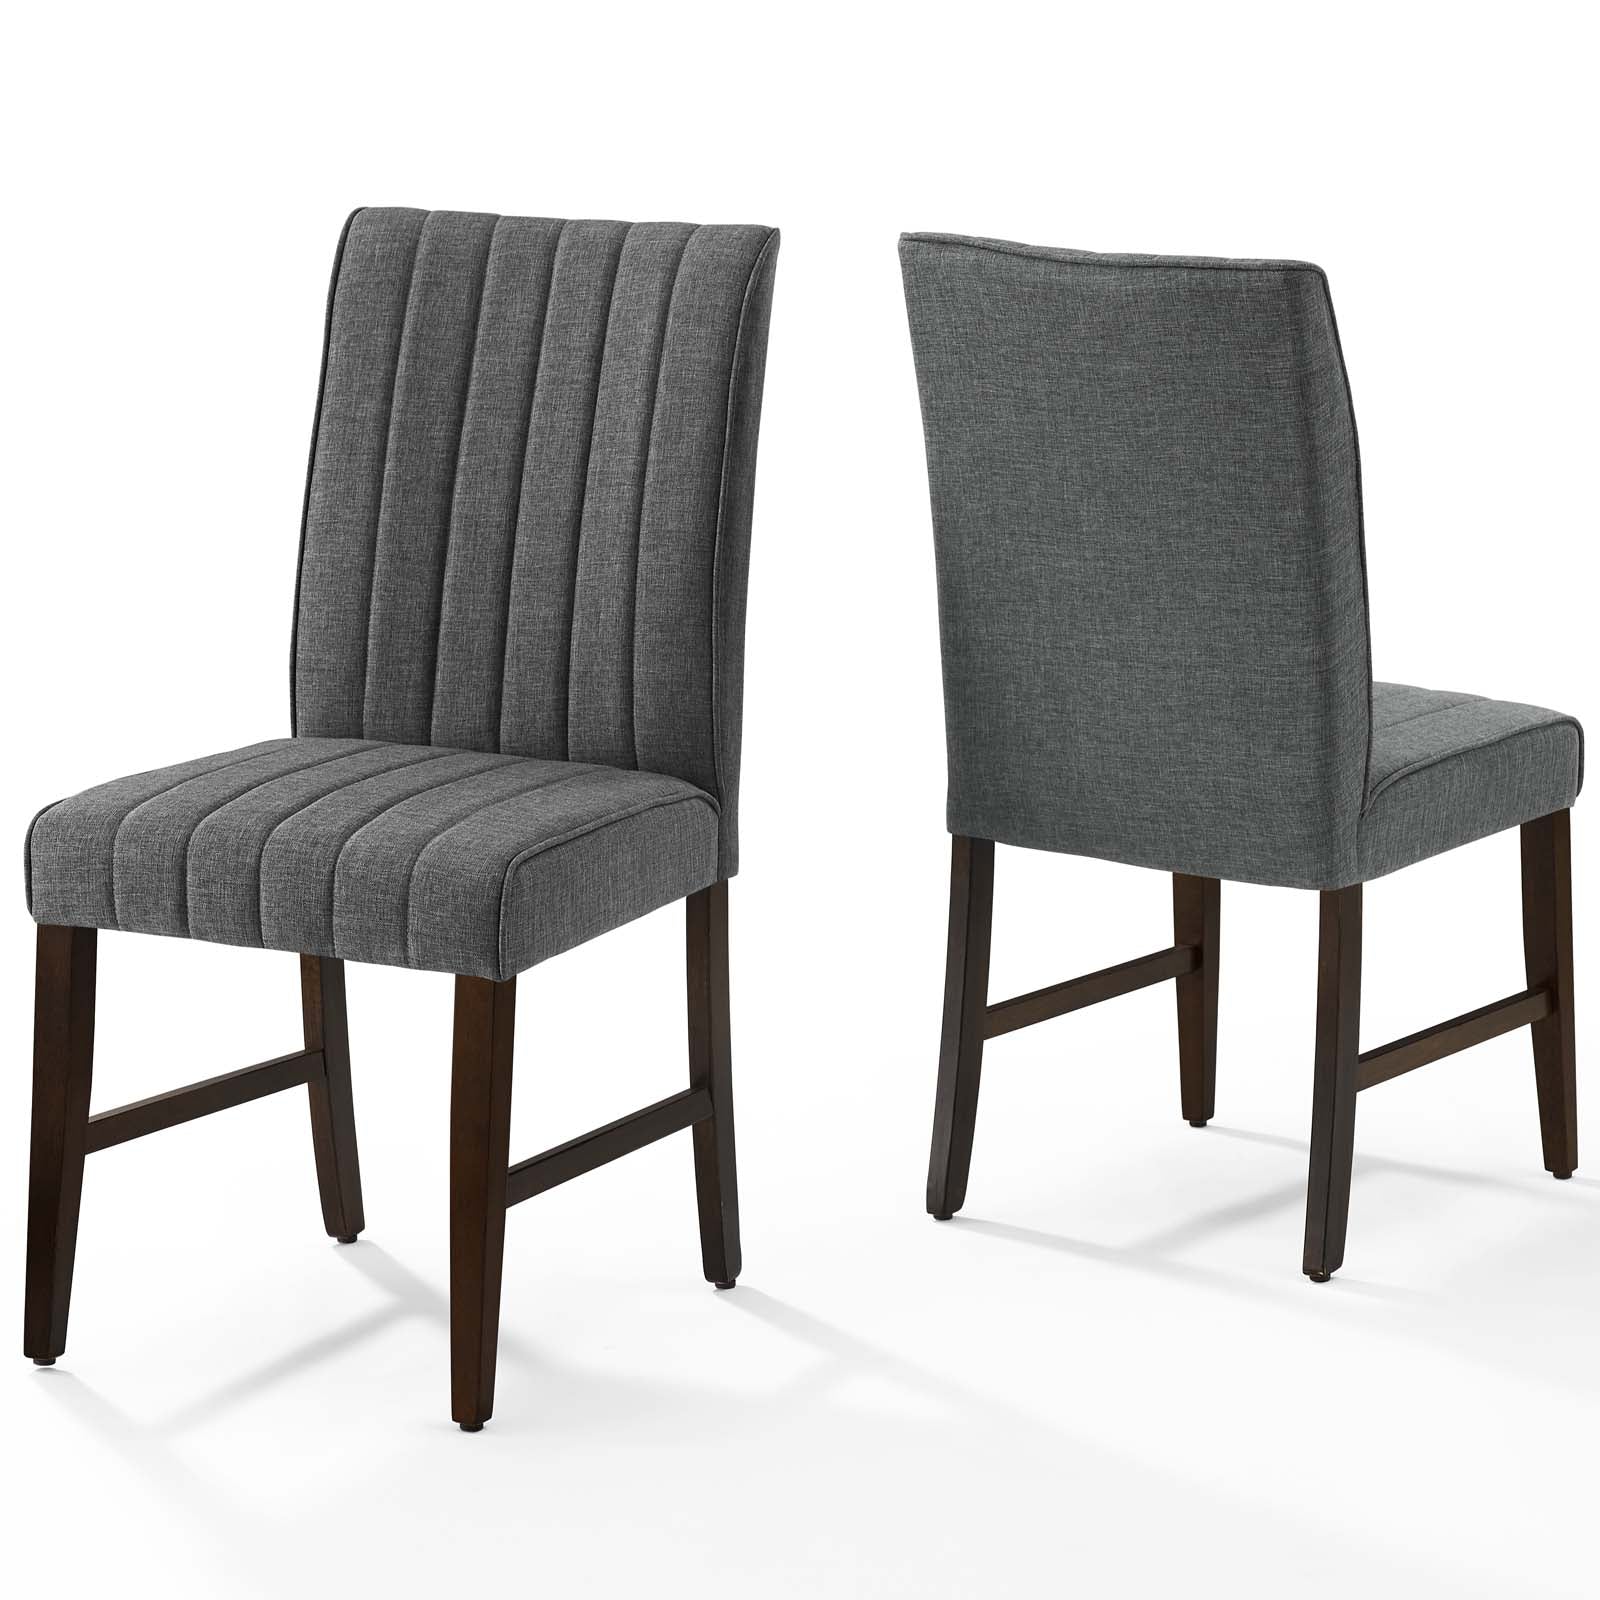 Motivate Channel Tufted Upholstered Fabric Dining Chair Set of 2 - East Shore Modern Home Furnishings